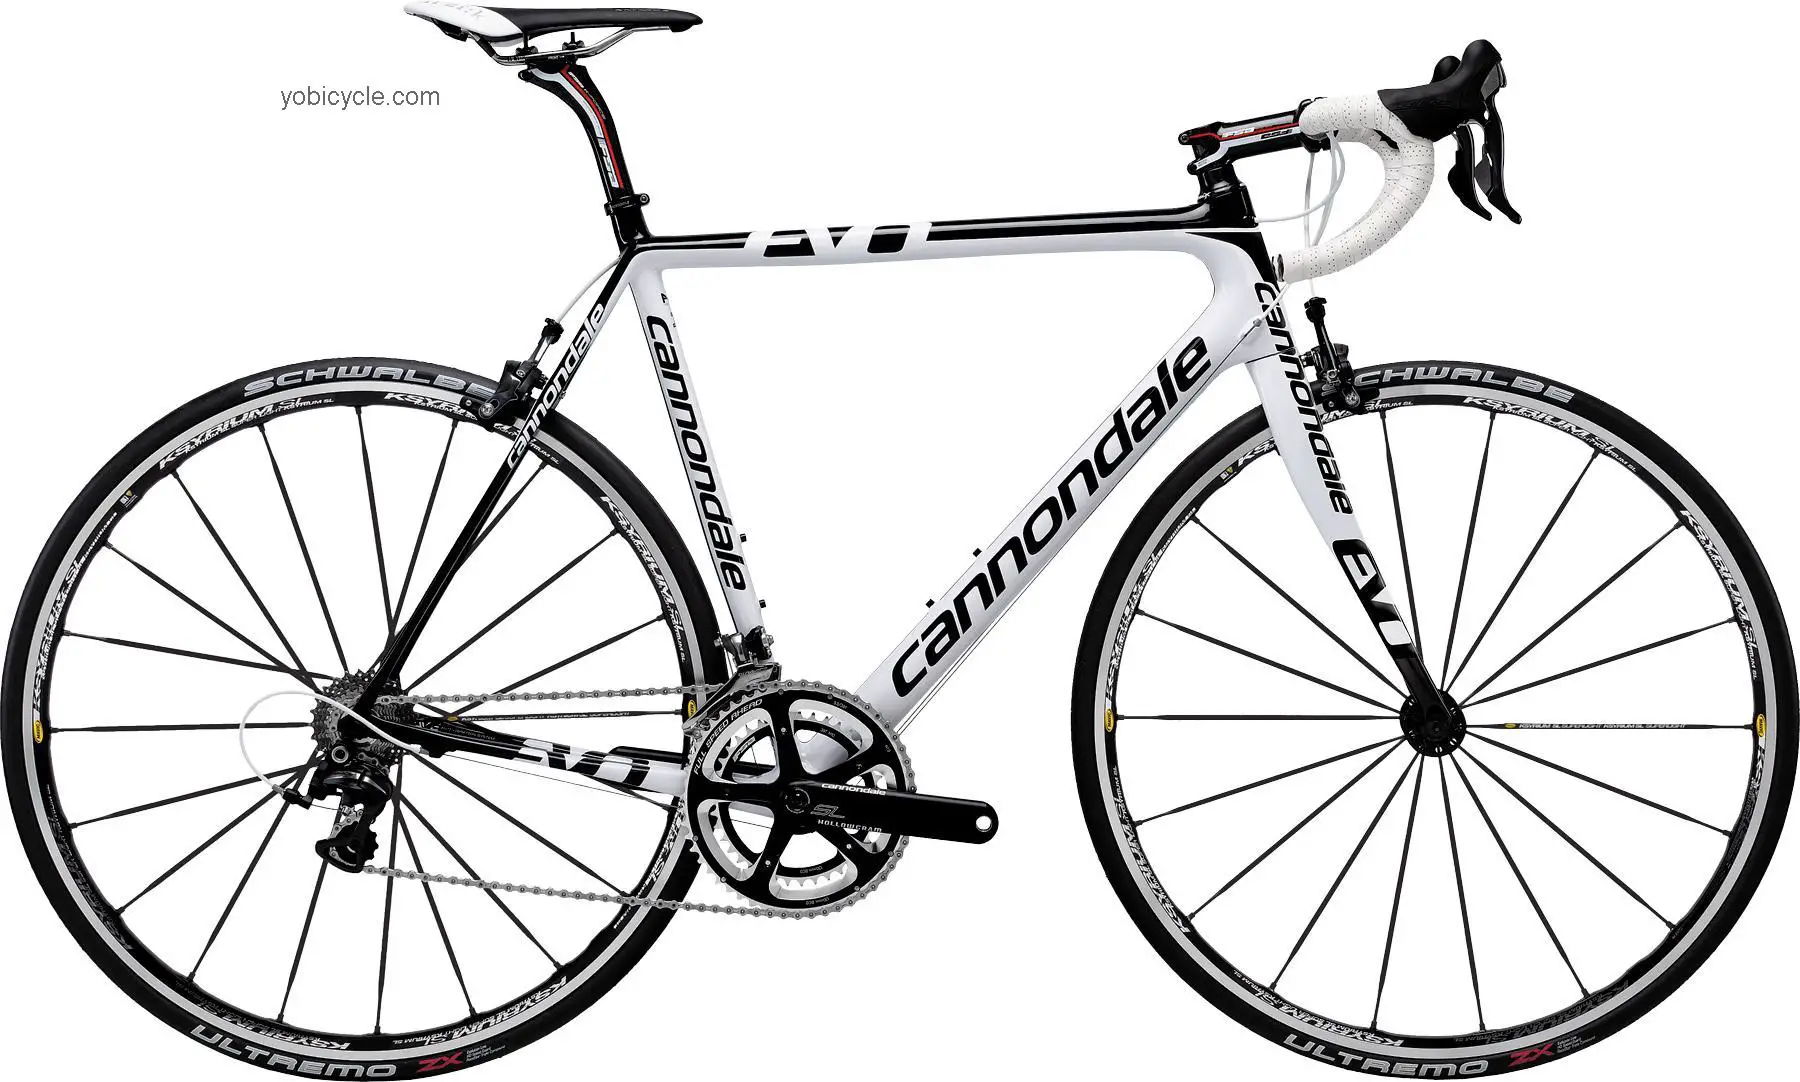 Cannondale  Super Six EVO 1 Dura-Ace Technical data and specifications